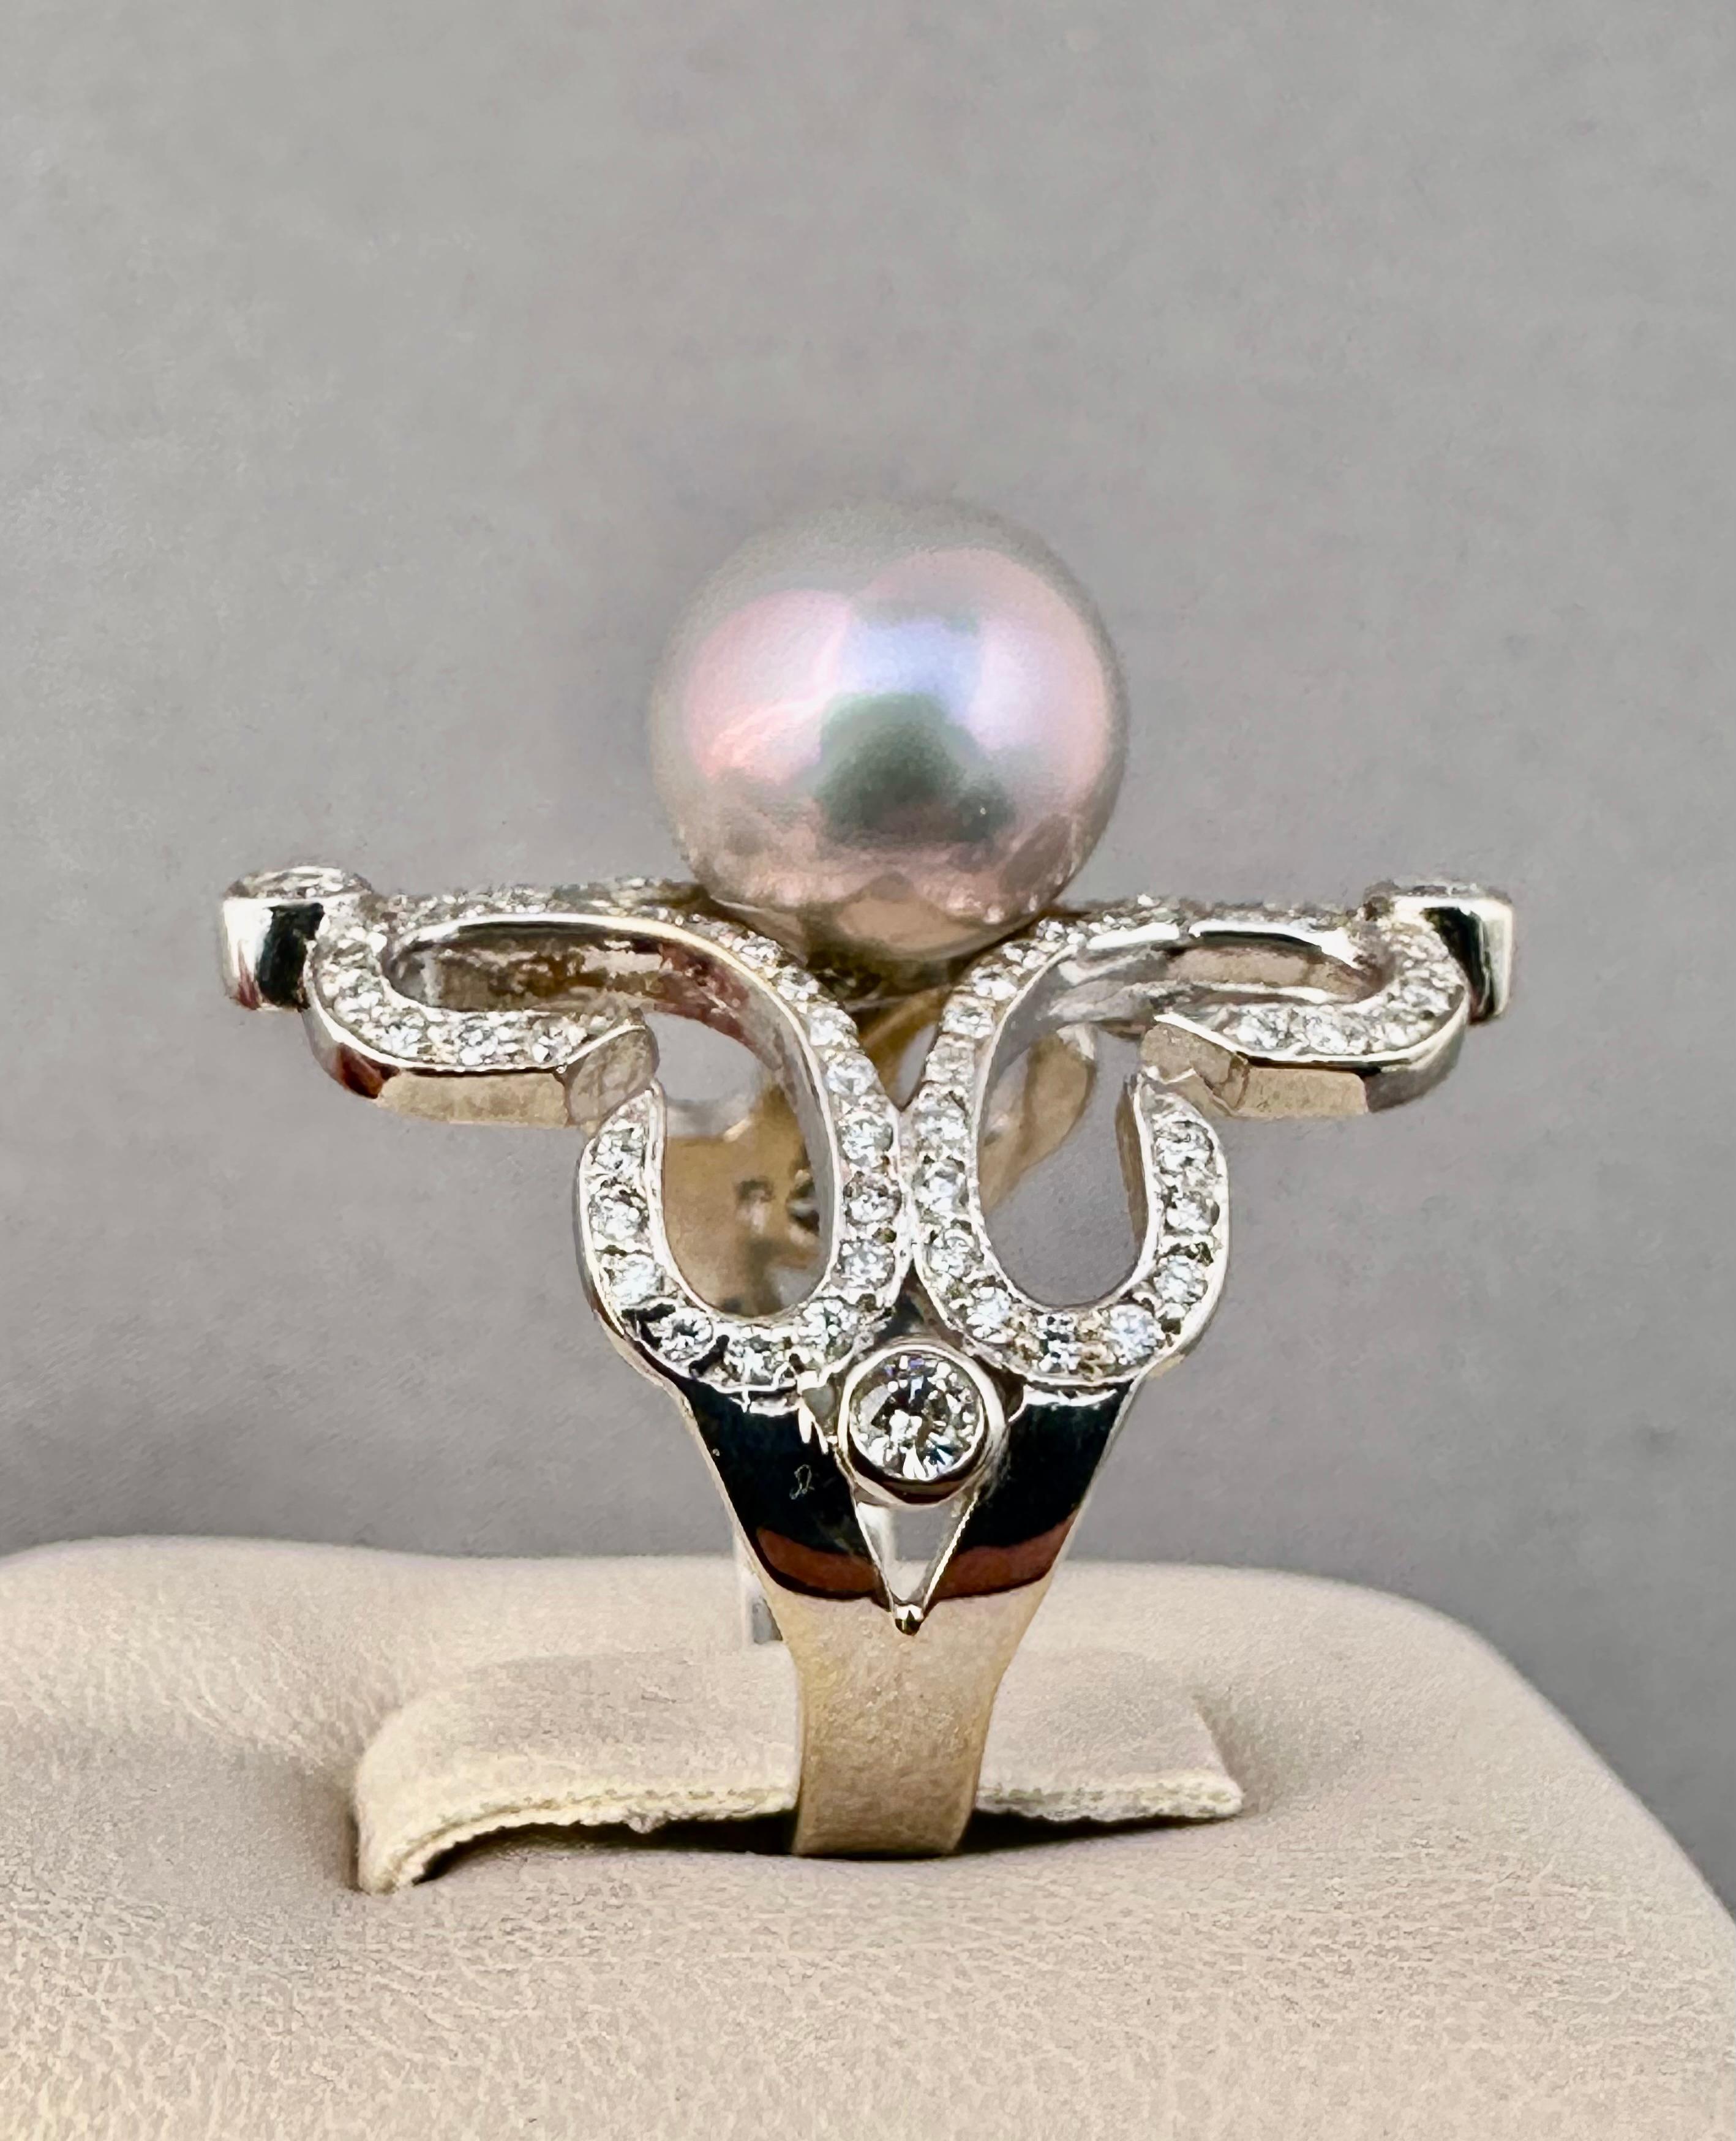 Diamond South Sea Pearl Cocktail Ring White Gold 18K

Diamond weight: 0.94 CT, F, VS1

Grey Pink South Sea Pearl: 10mm

Size:6

Creators Overview:

